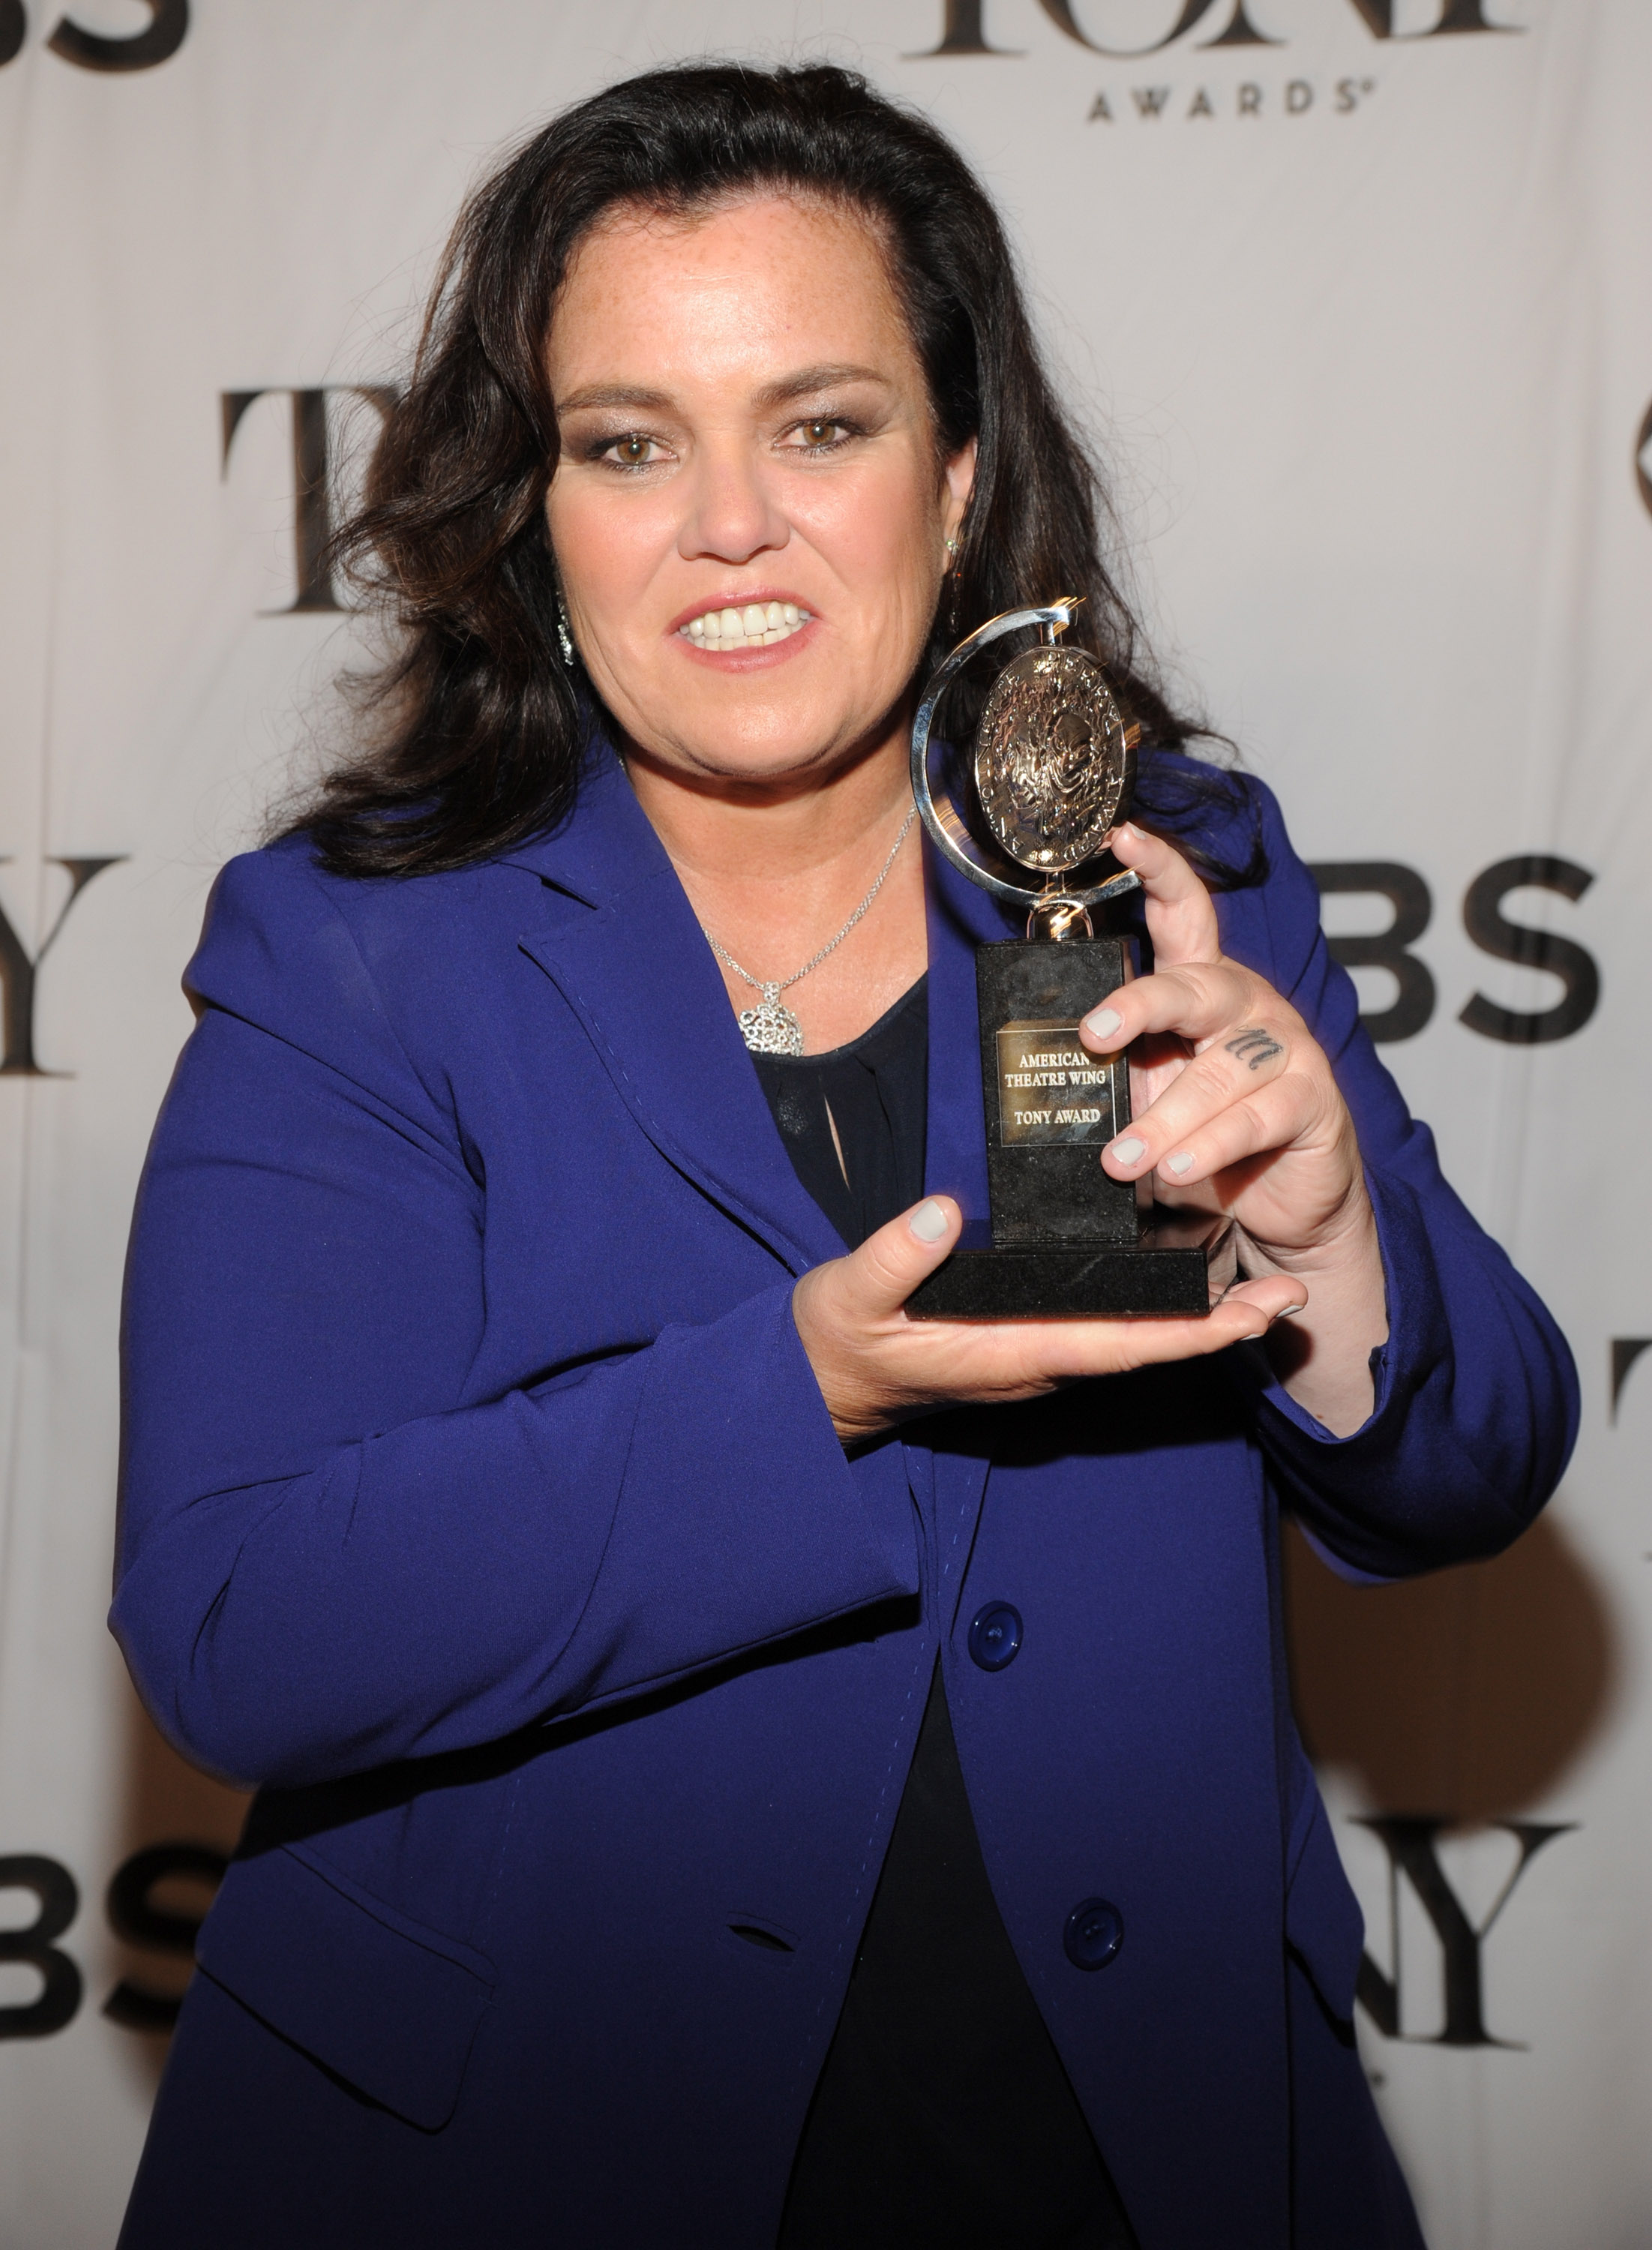 Rosie O'Donnell attends the 68th Annual Tony Awards at Radio City Music Hall on June 8, 2014 in New York City. (Kevin Mazur—2014 Kevin Mazur)